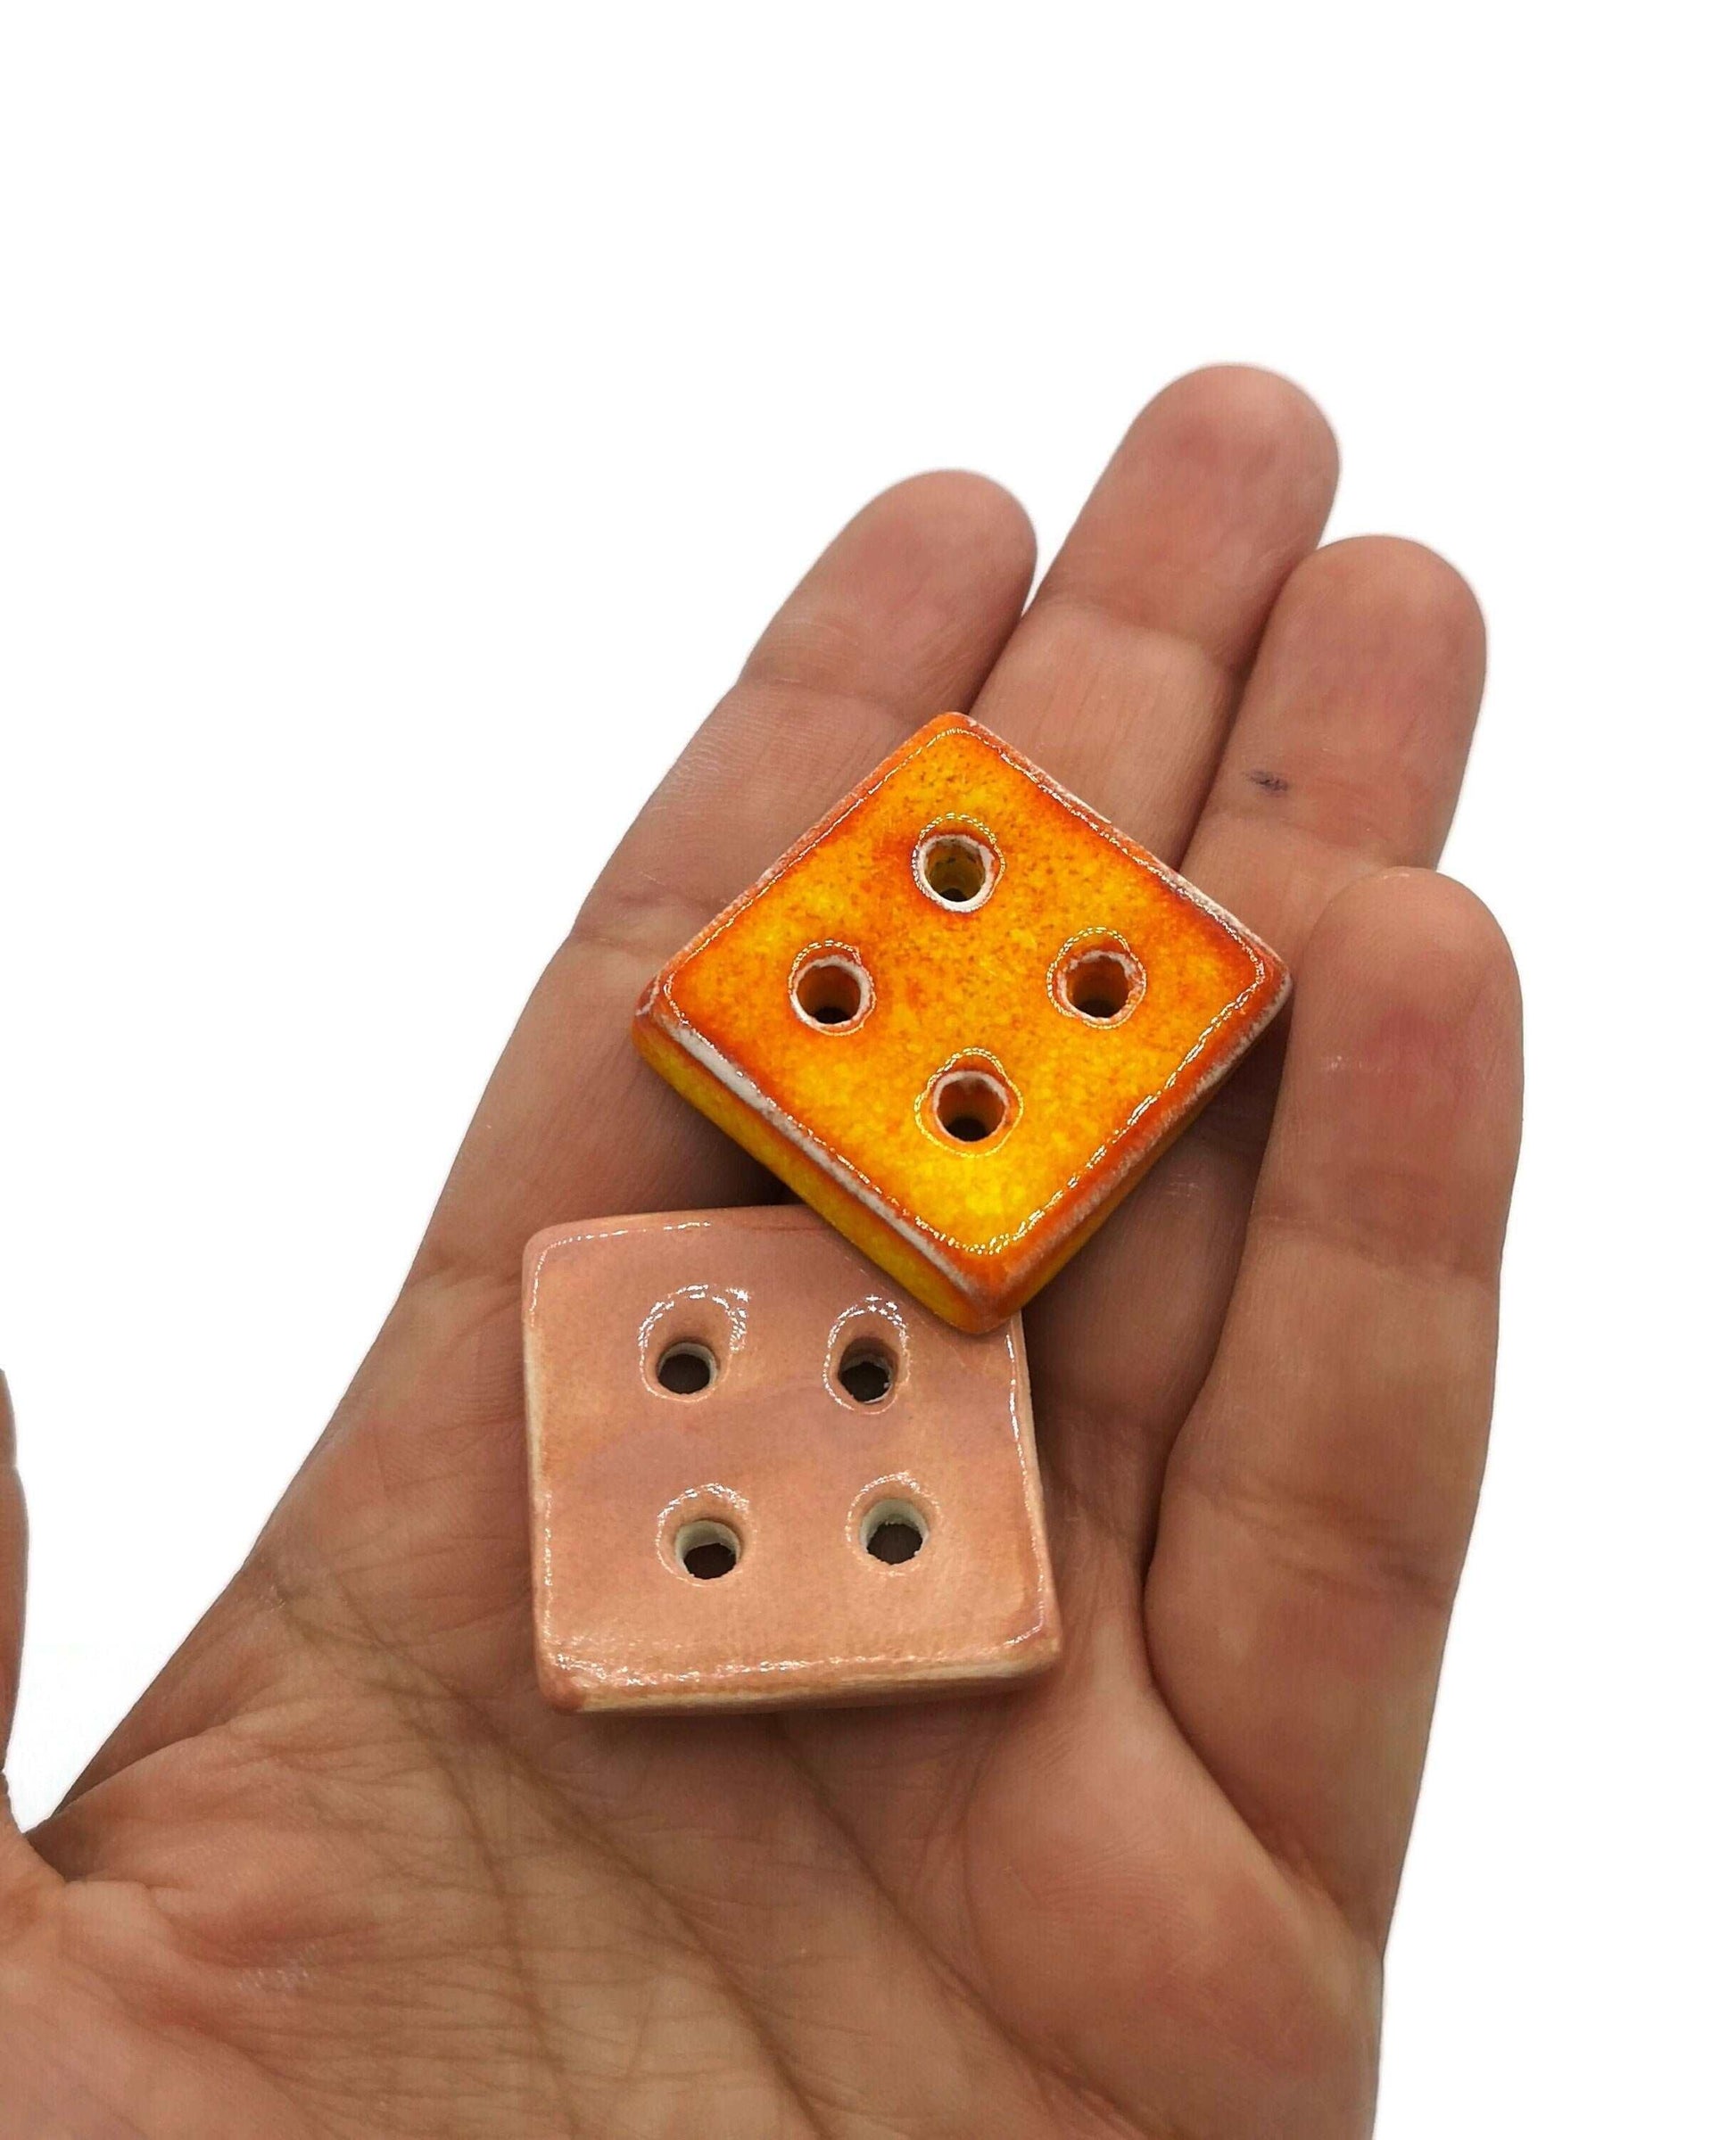 1Pc 30mm Orange Square Ceramic Buttons, Cute Pottery Coat Buttons, Best Sellers Sewing Supplies And Notions, Handmade Button Antique Look